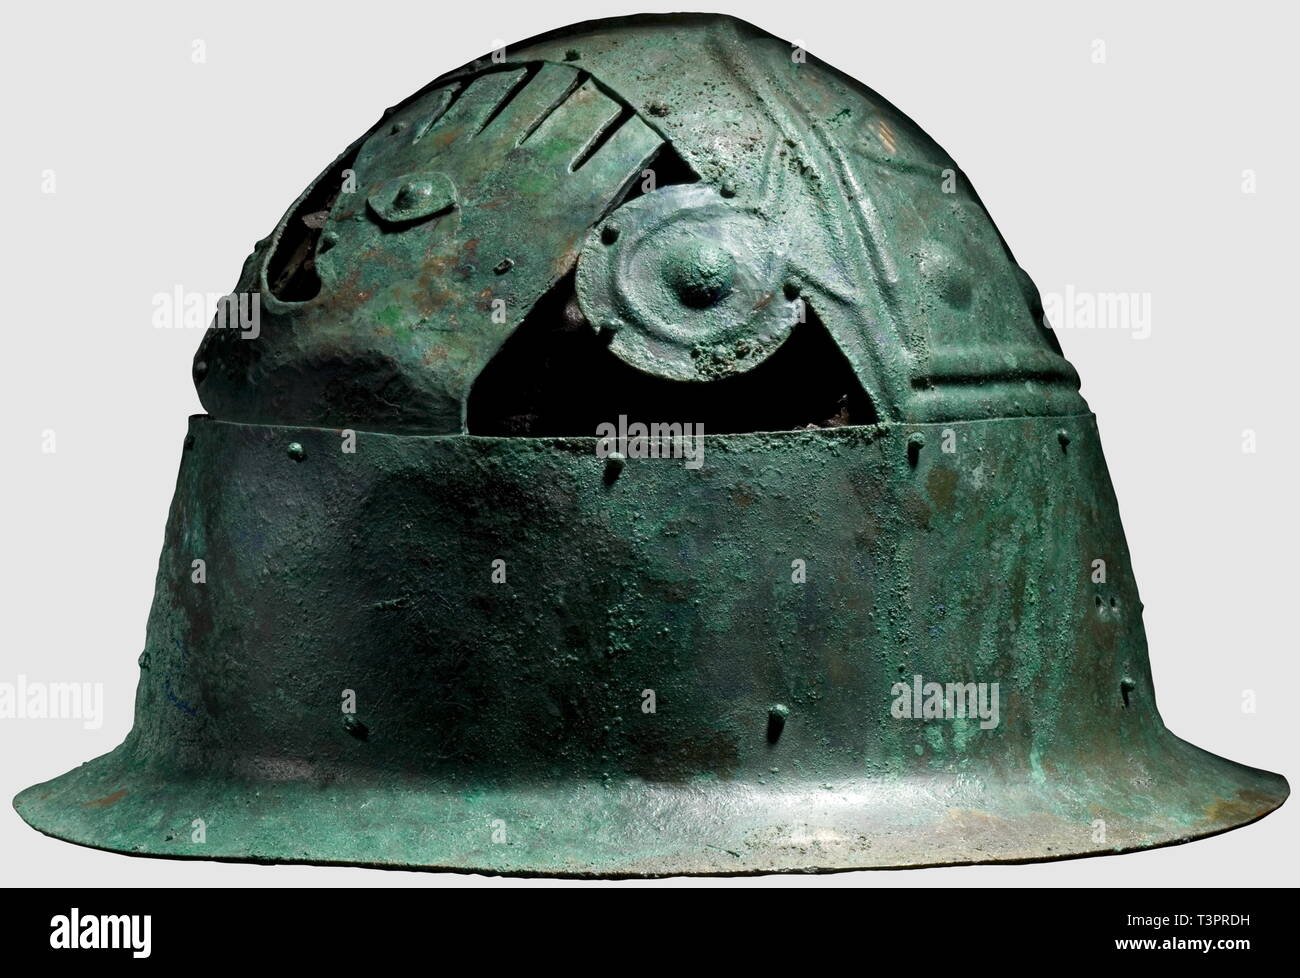 Helmets, Italic helmets, picenian pomp helmet with lining and ornaments, bronze, 7th century BC, Additional-Rights-Clearance-Info-Not-Available Stock Photo